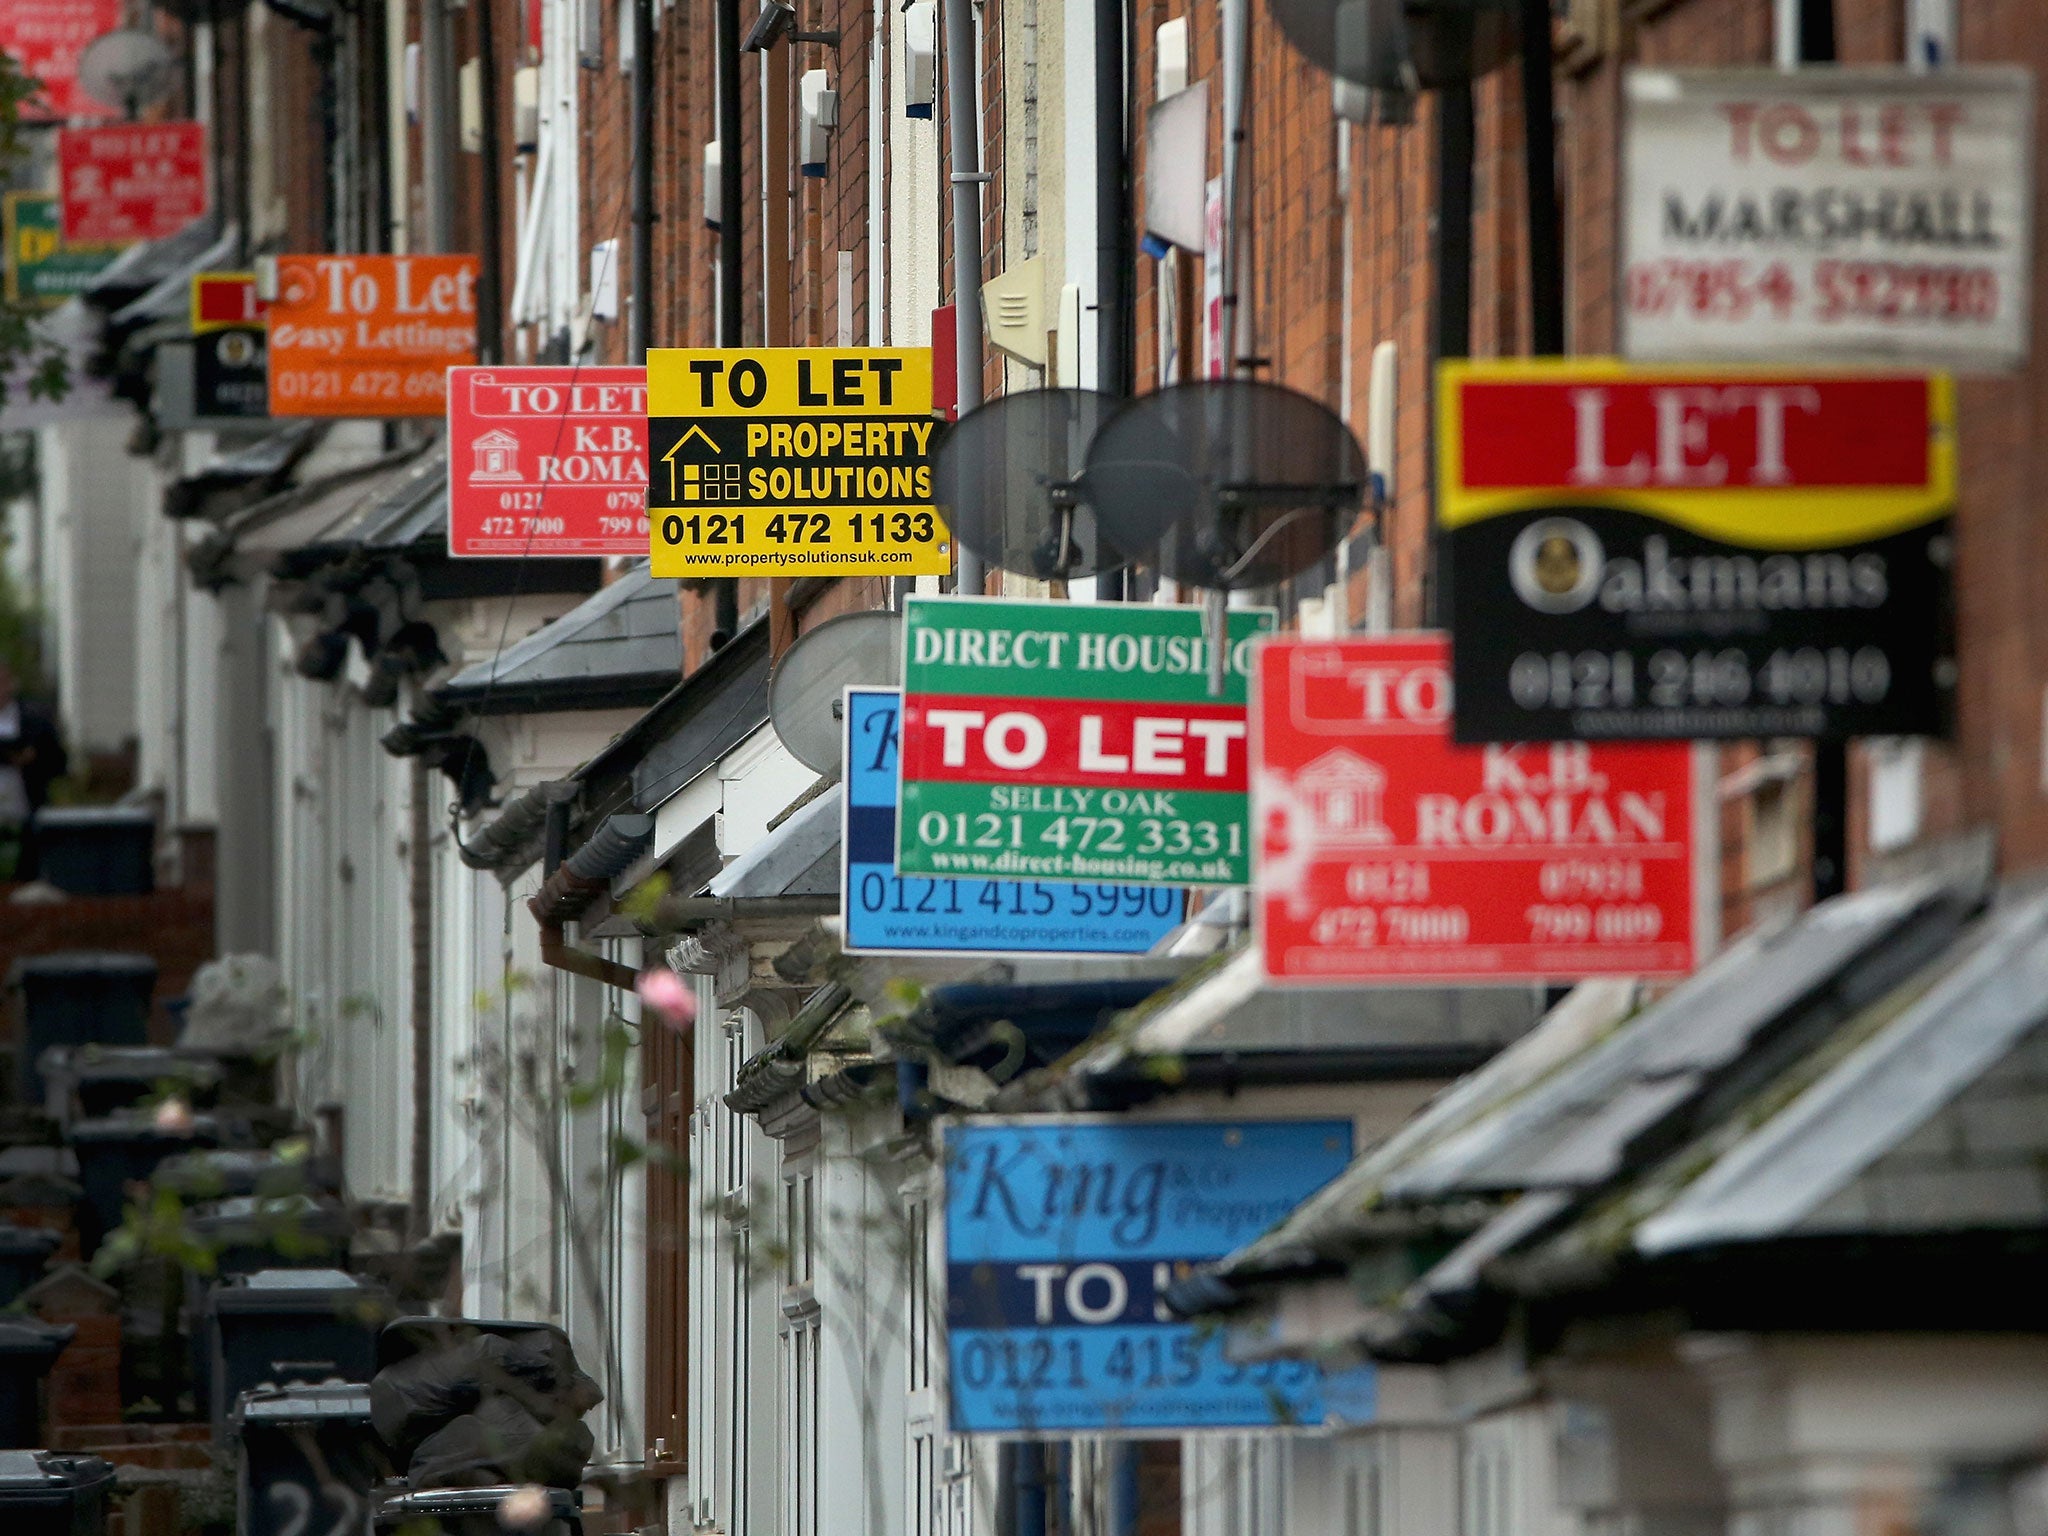 Large parts of England are about to become off-limits for tens of thousands of poorer families because of the planned cut in the annual benefit cap, David Cameron is being warned by housing experts